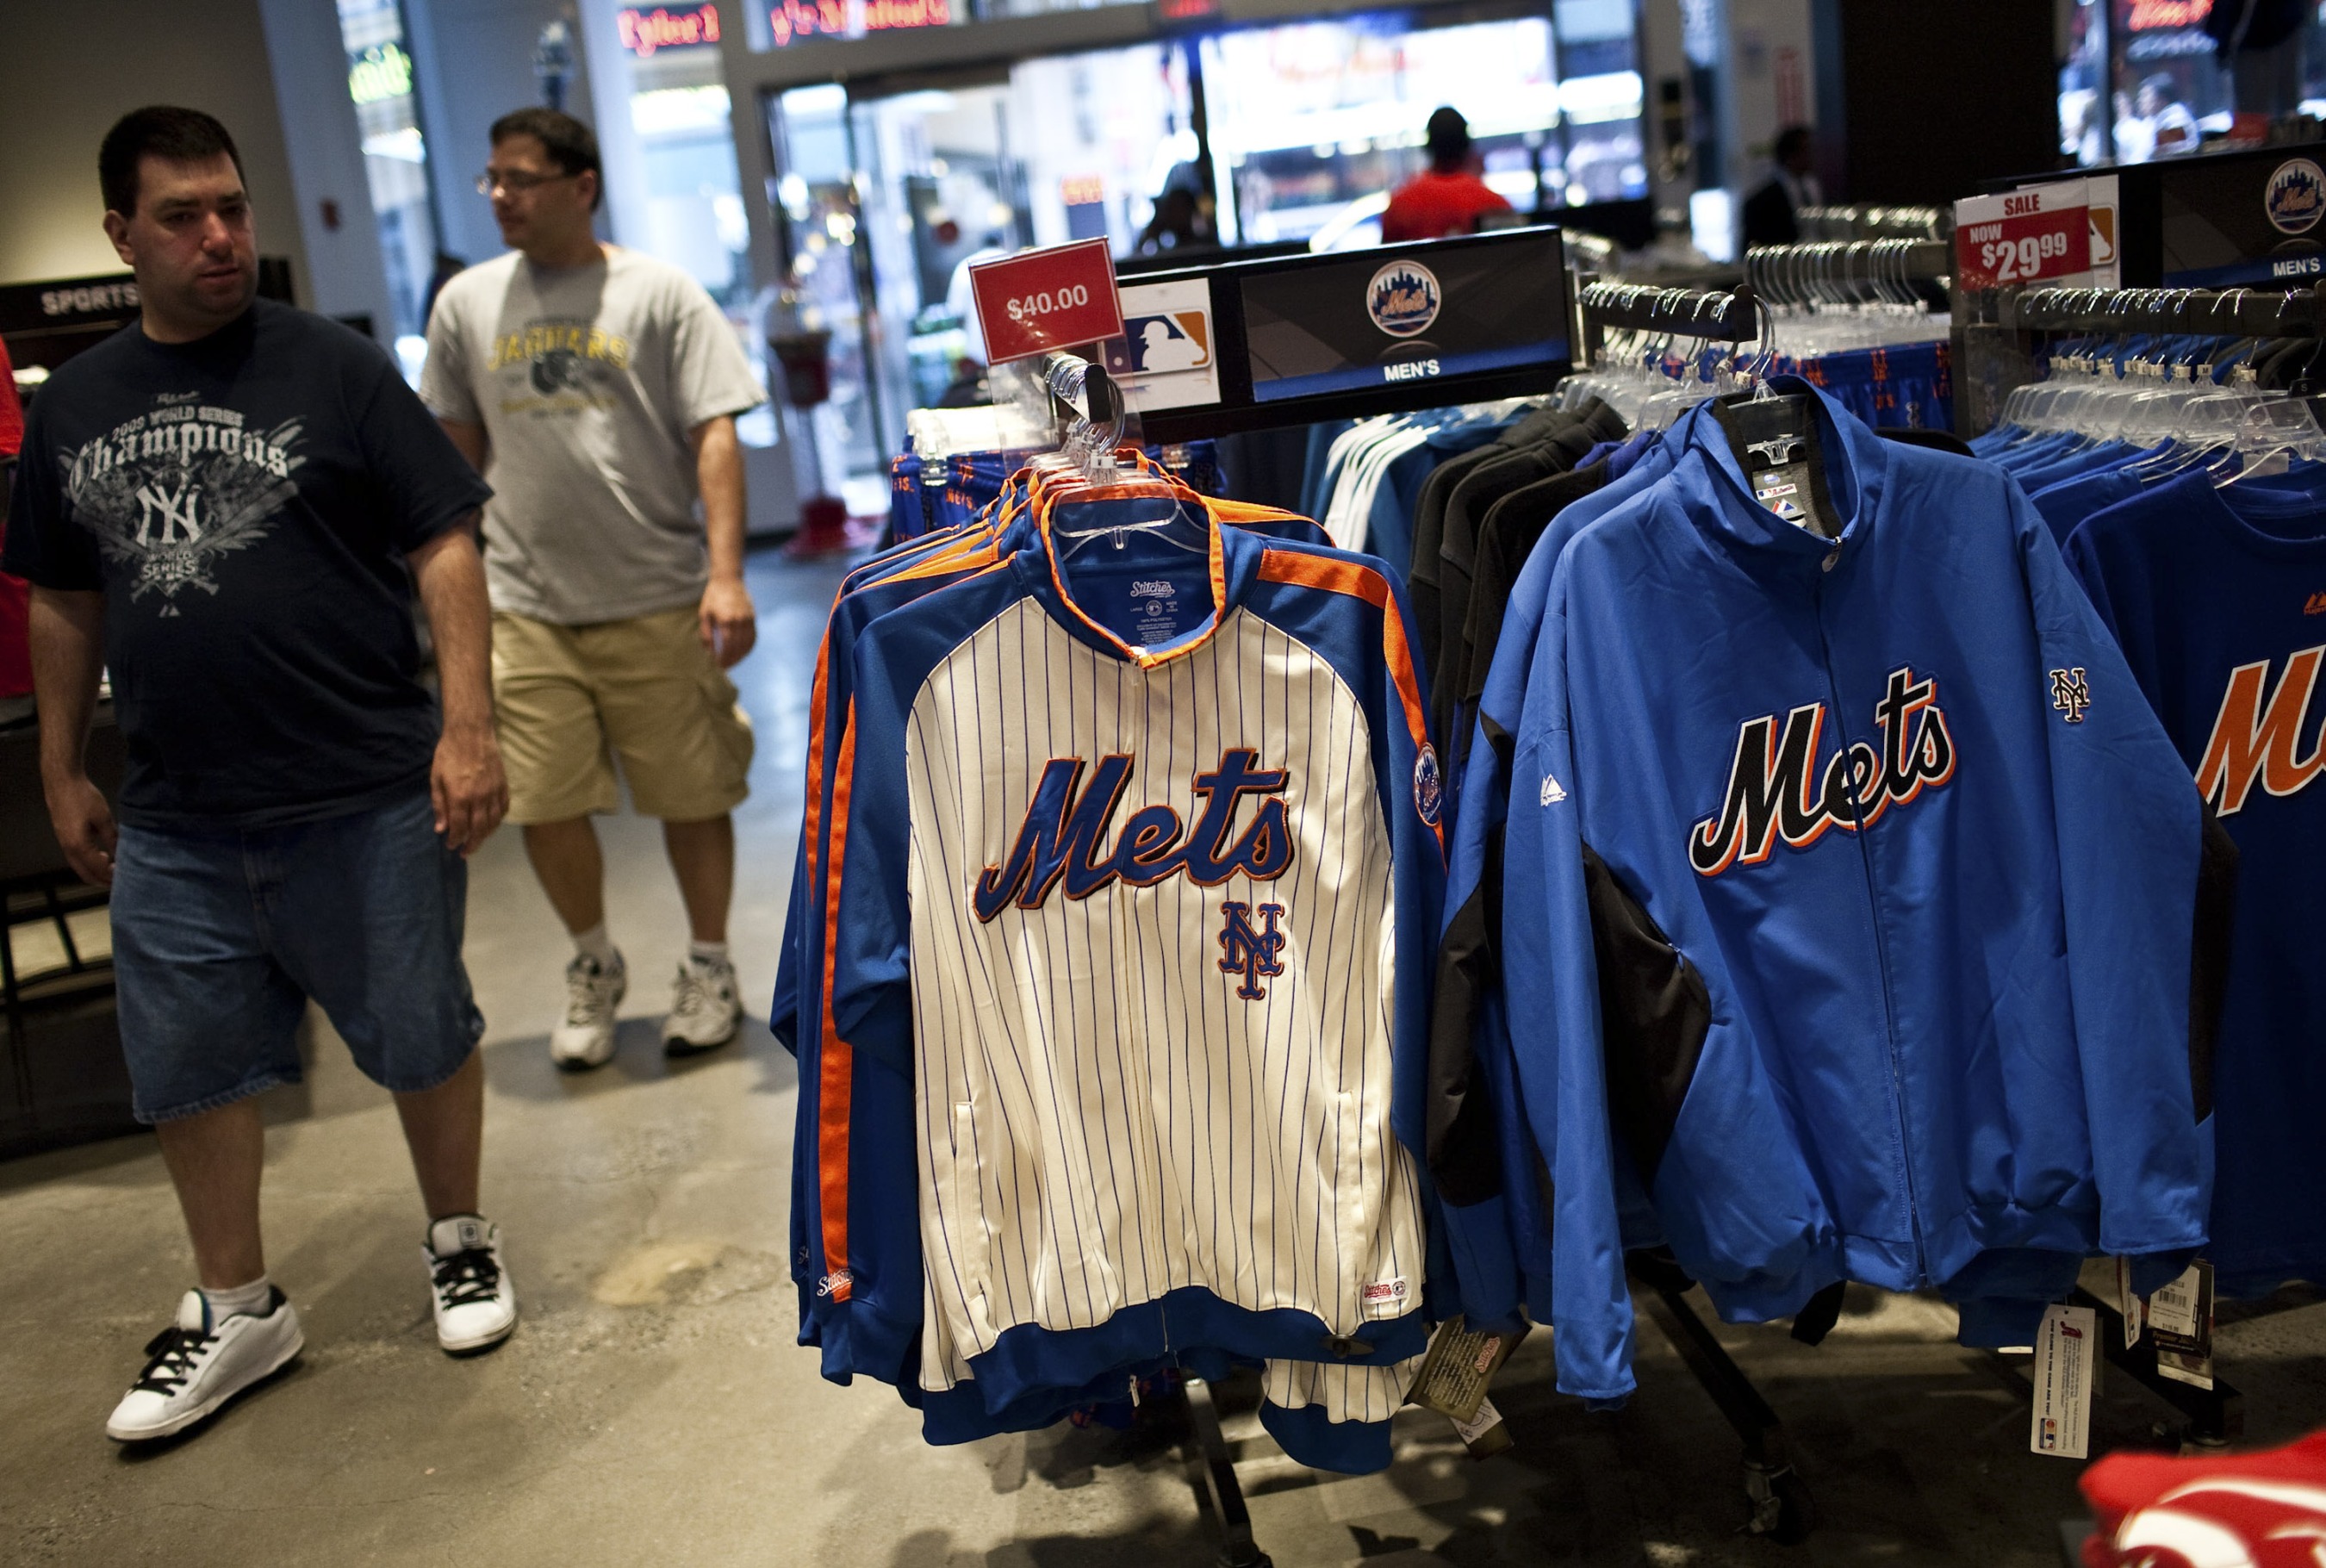 Modell's Sporting Goods Files for Bankruptcy, Closing All Stores - Bloomberg